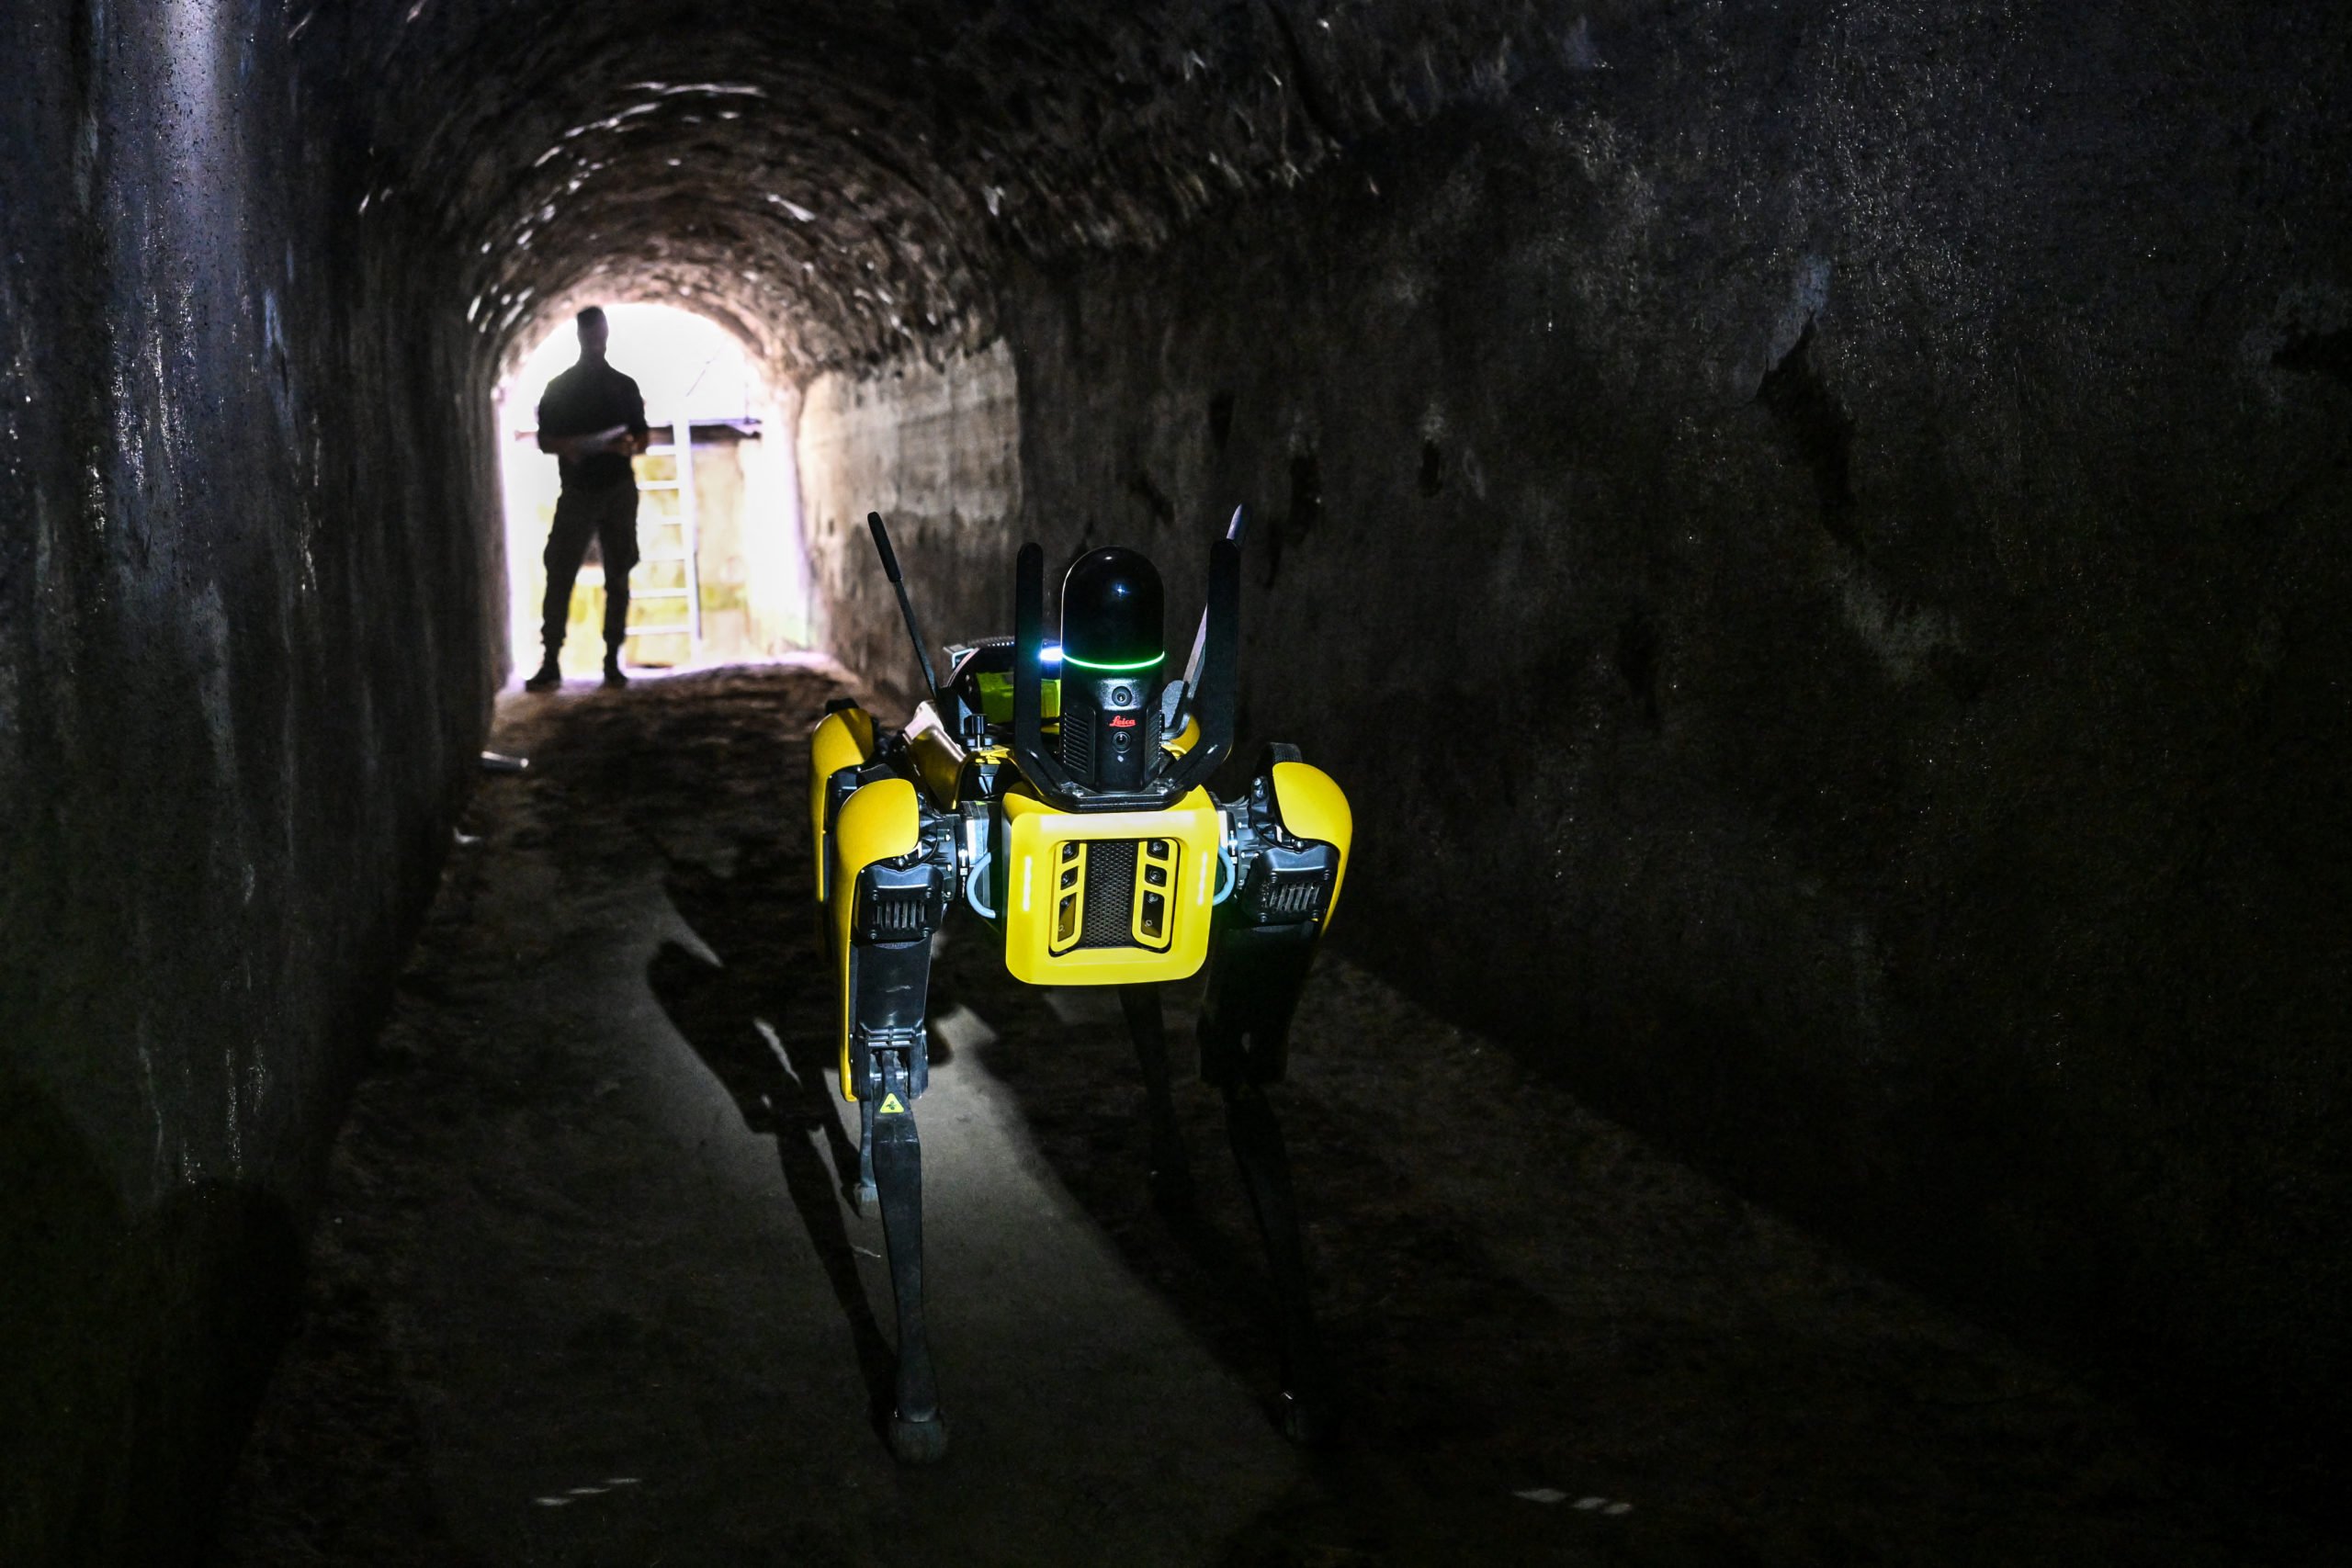 Spot is driven through an underground tunnel by a technician. 